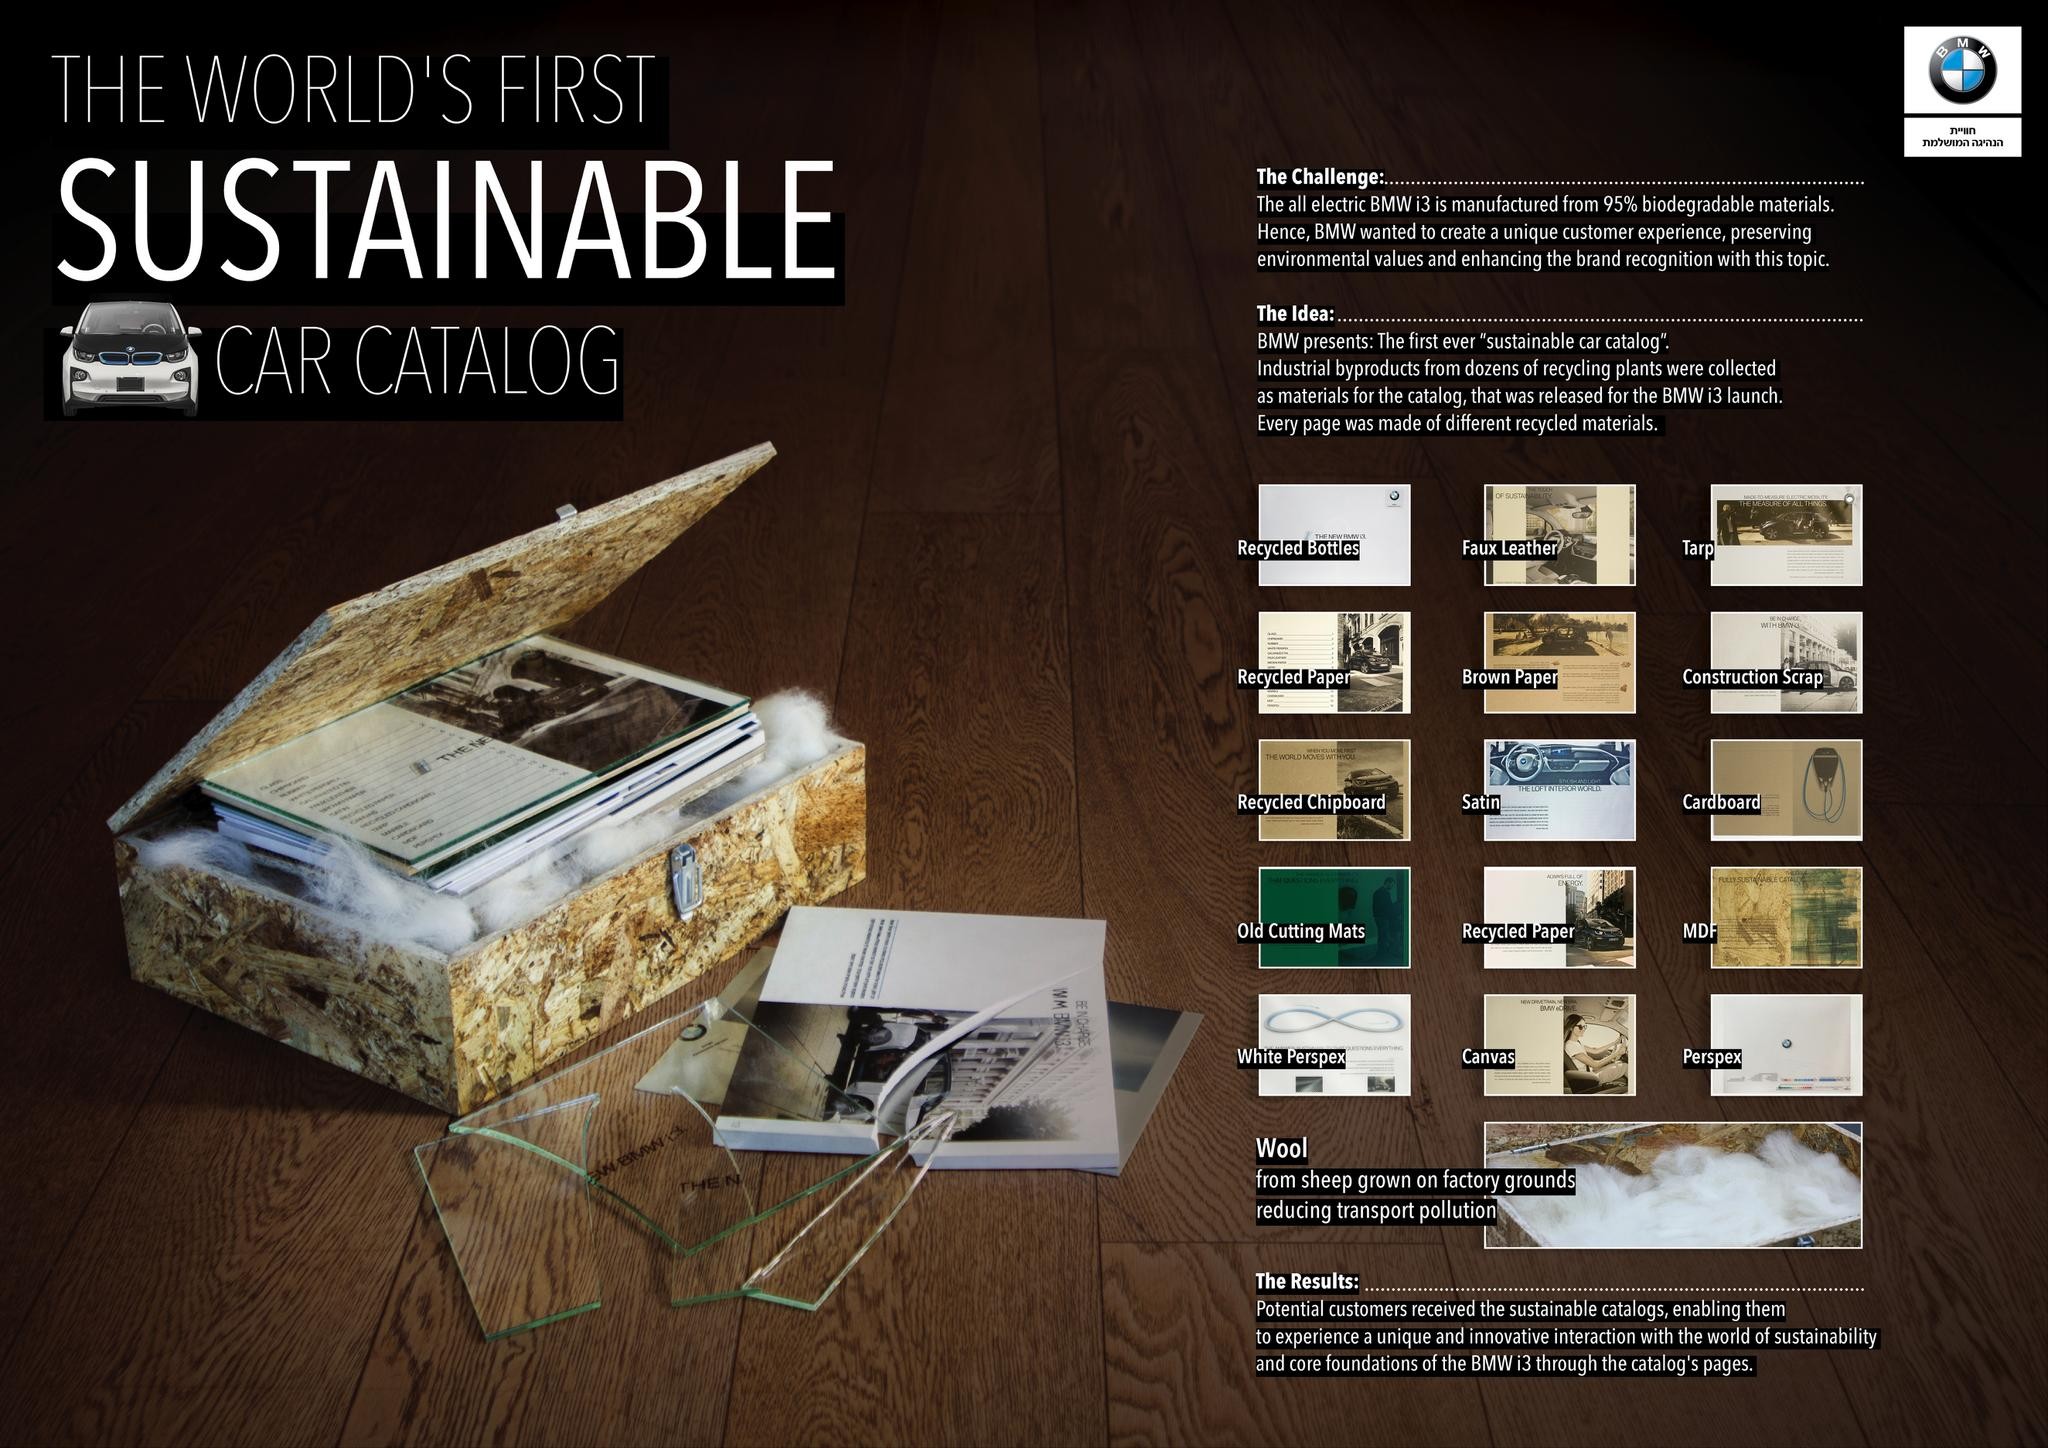 The world's first sustainable car catalog